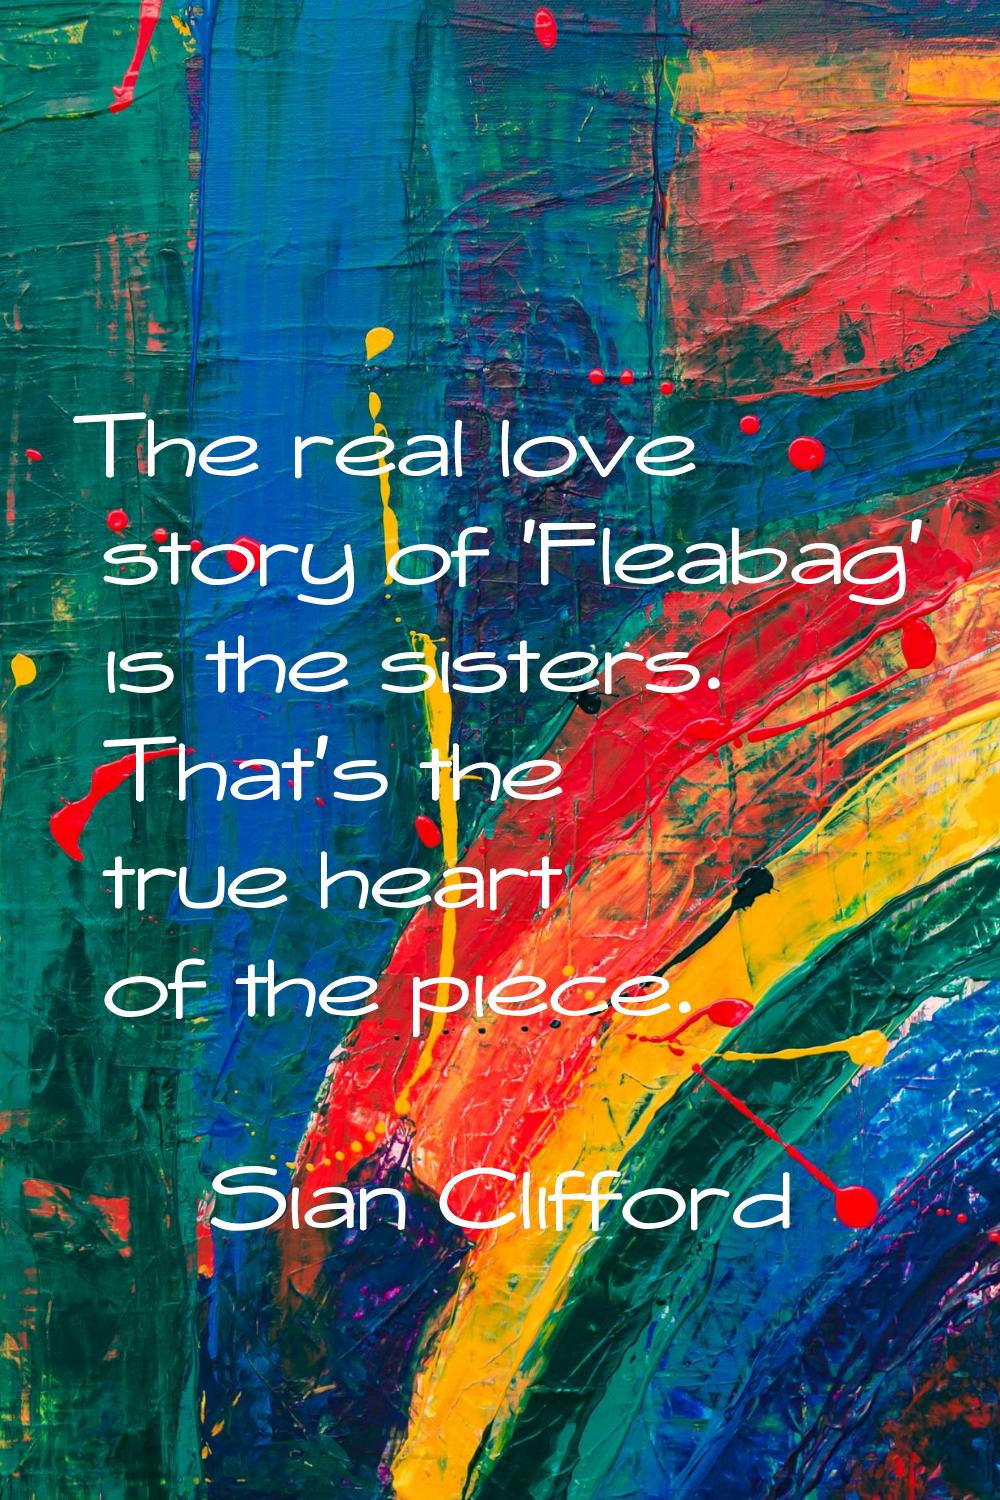 The real love story of 'Fleabag' is the sisters. That's the true heart of the piece.